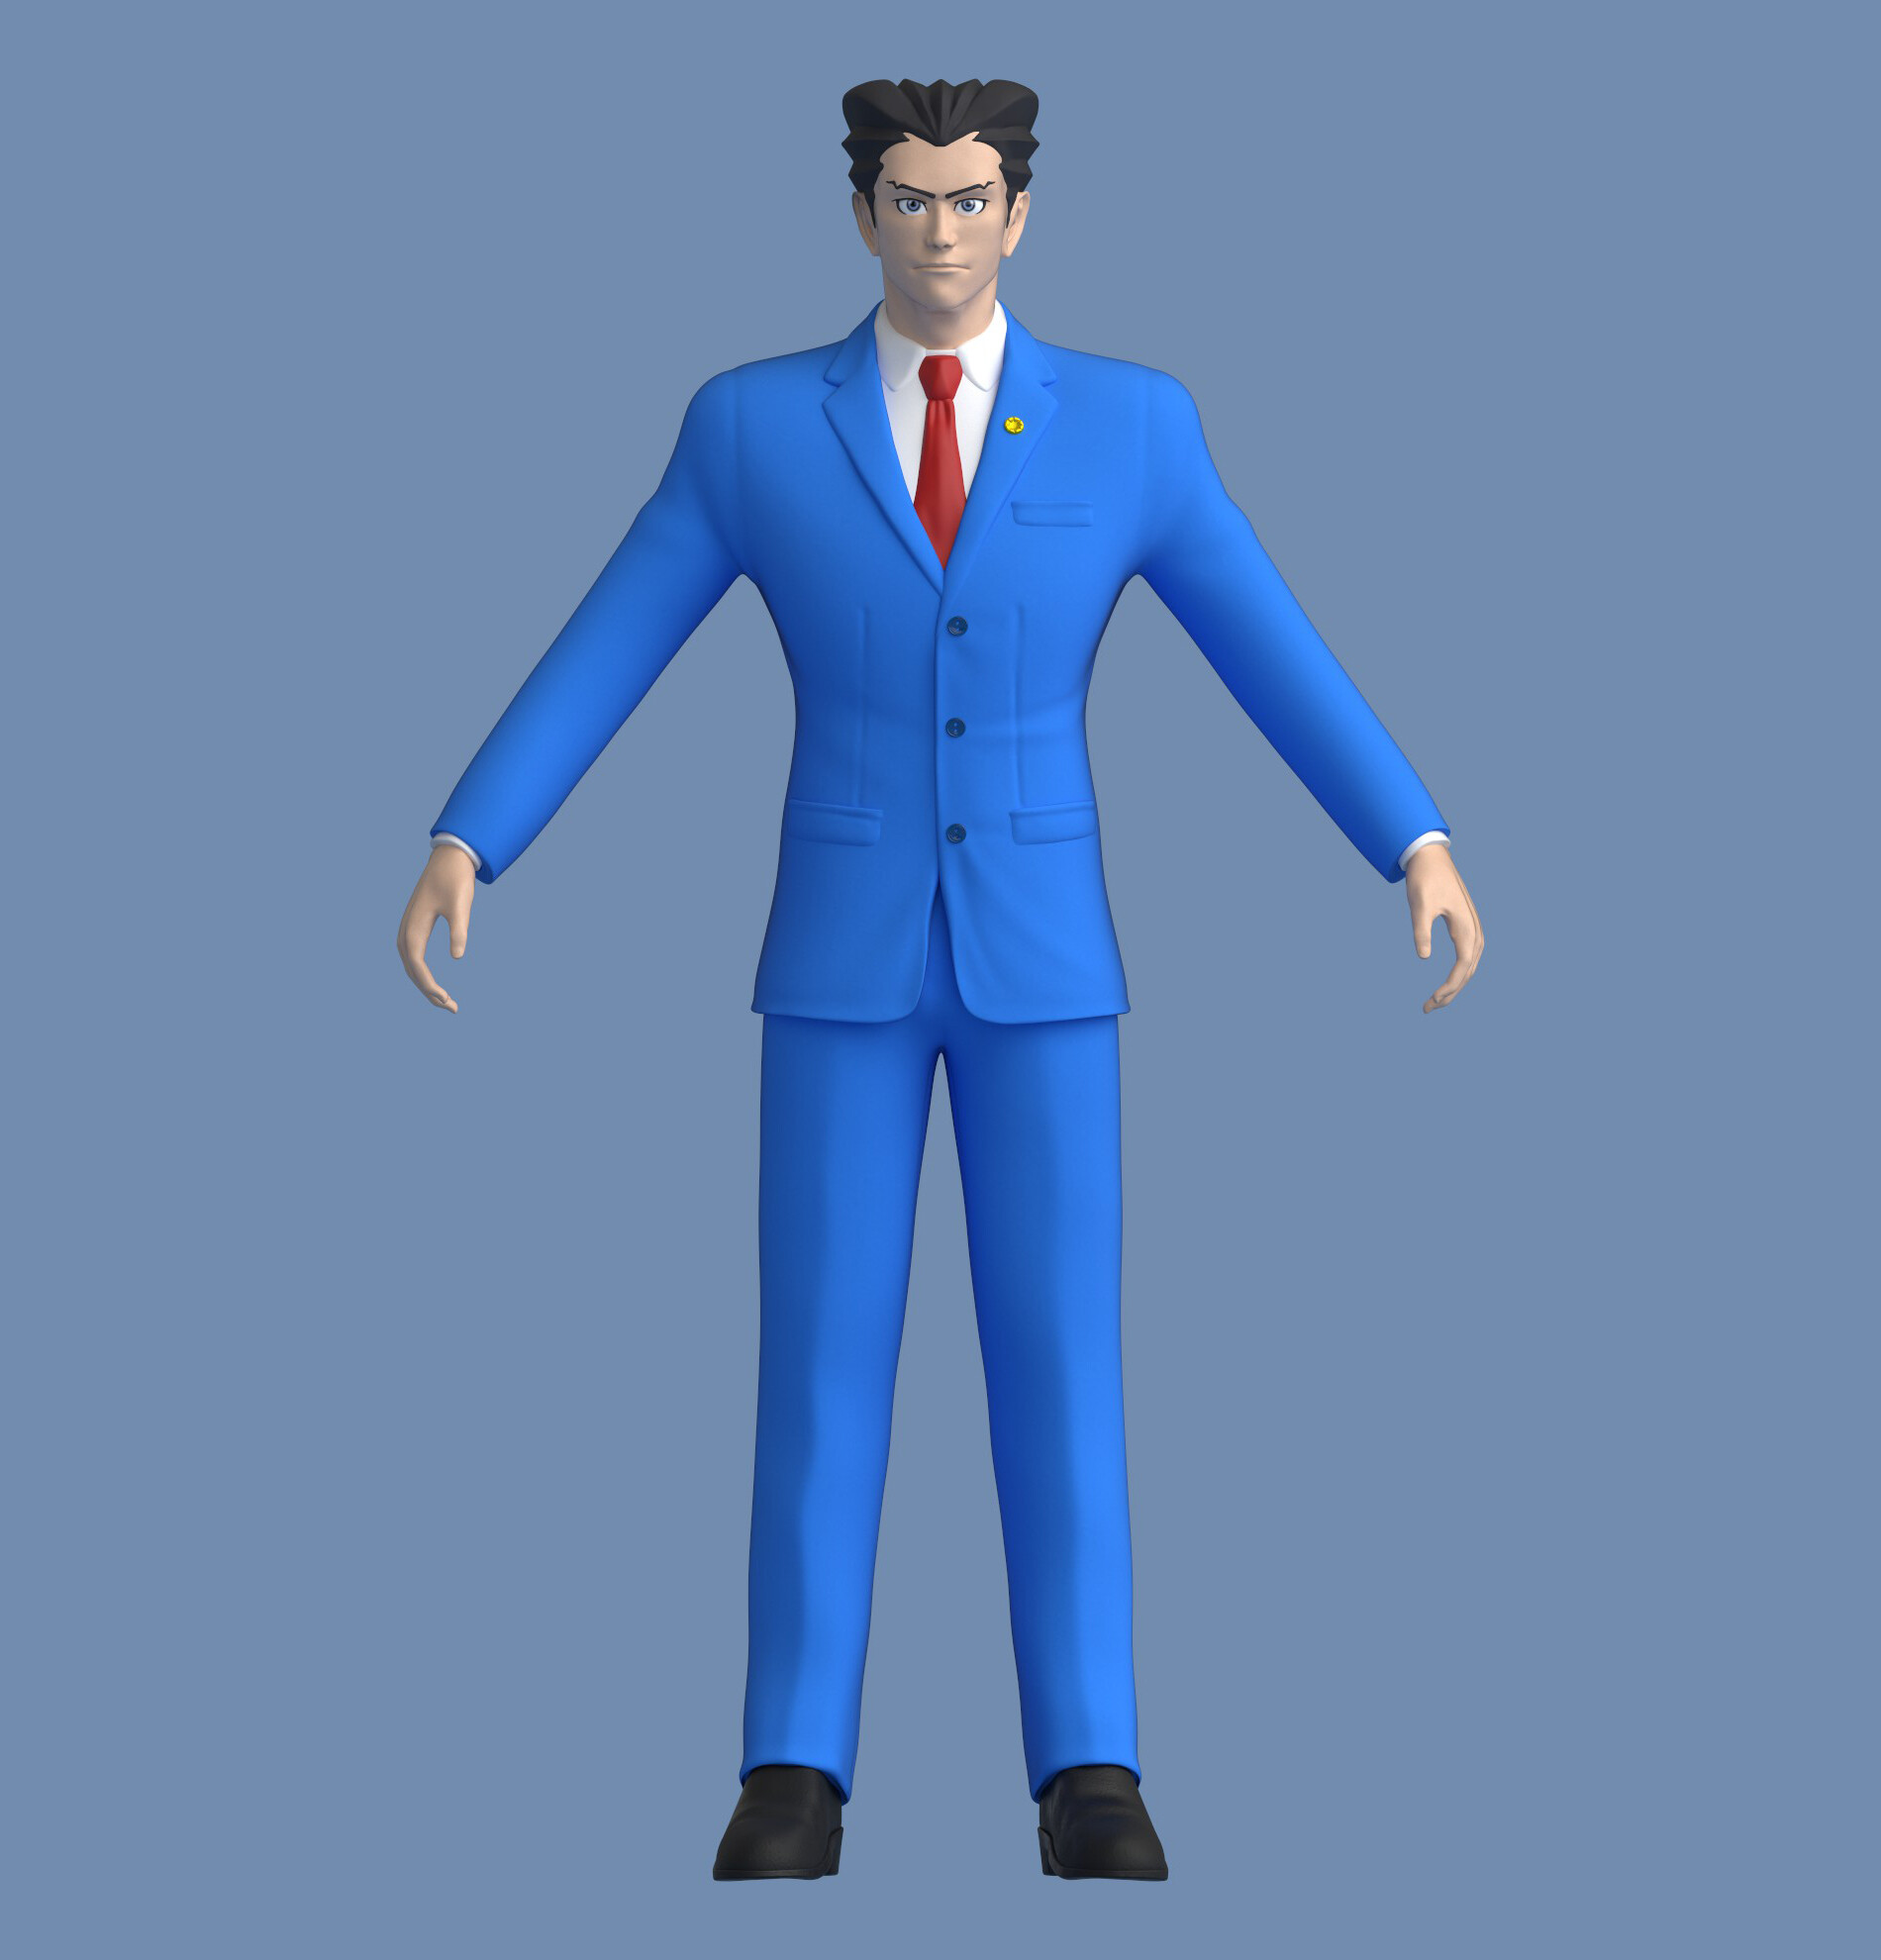 bitchin-icons - Phoenix Wright from Ace Attorney IconsRequested...